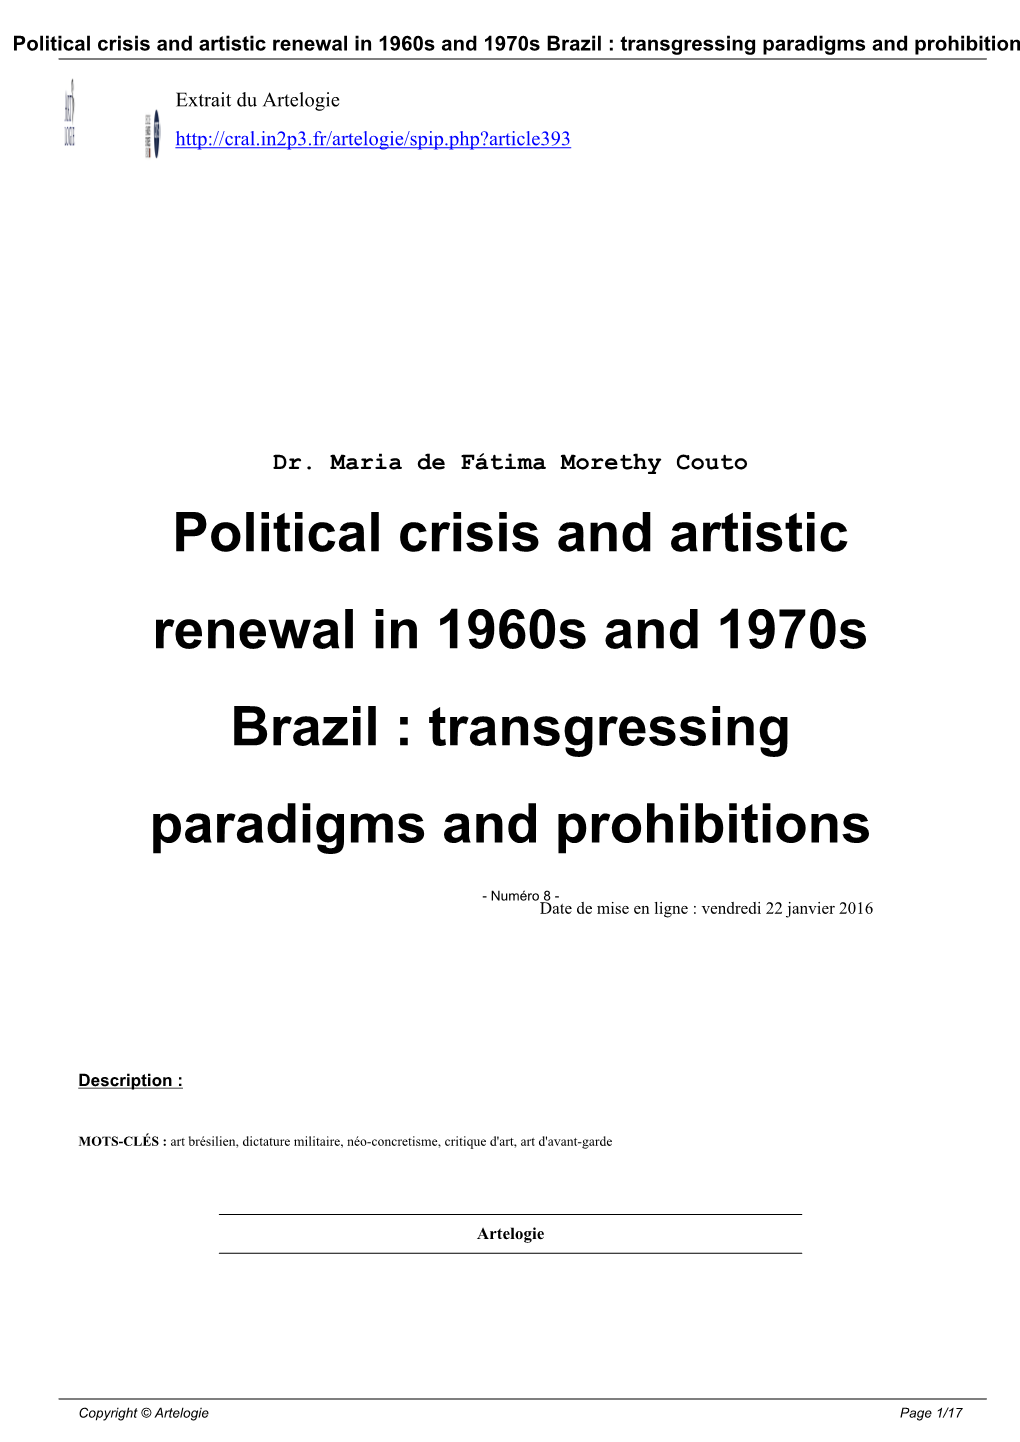 Political Crisis and Artistic Renewal in 1960S and 1970S Brazil : Transgressing Paradigms and Prohibitions